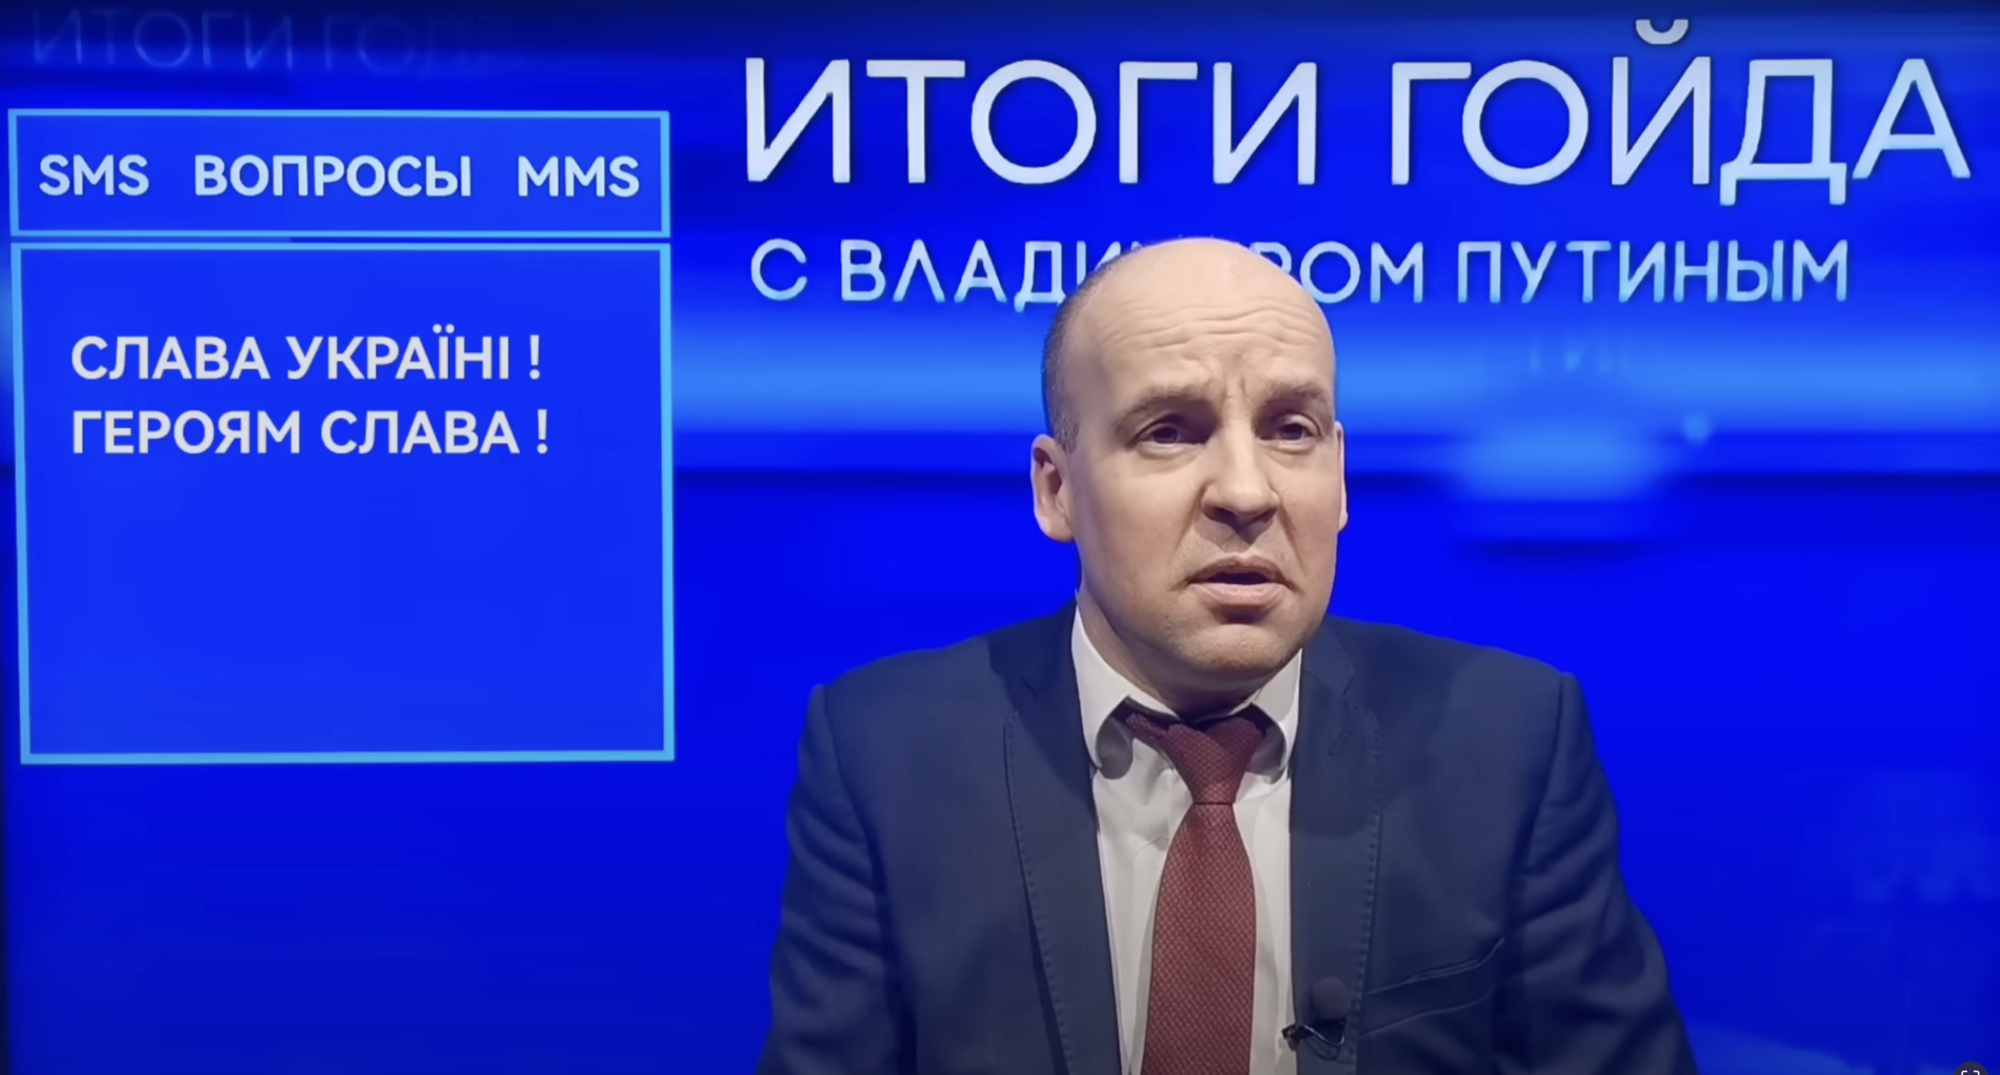 ''Year in review'': comedian Velykyi amused with a parody of Putin's mendacious press conference